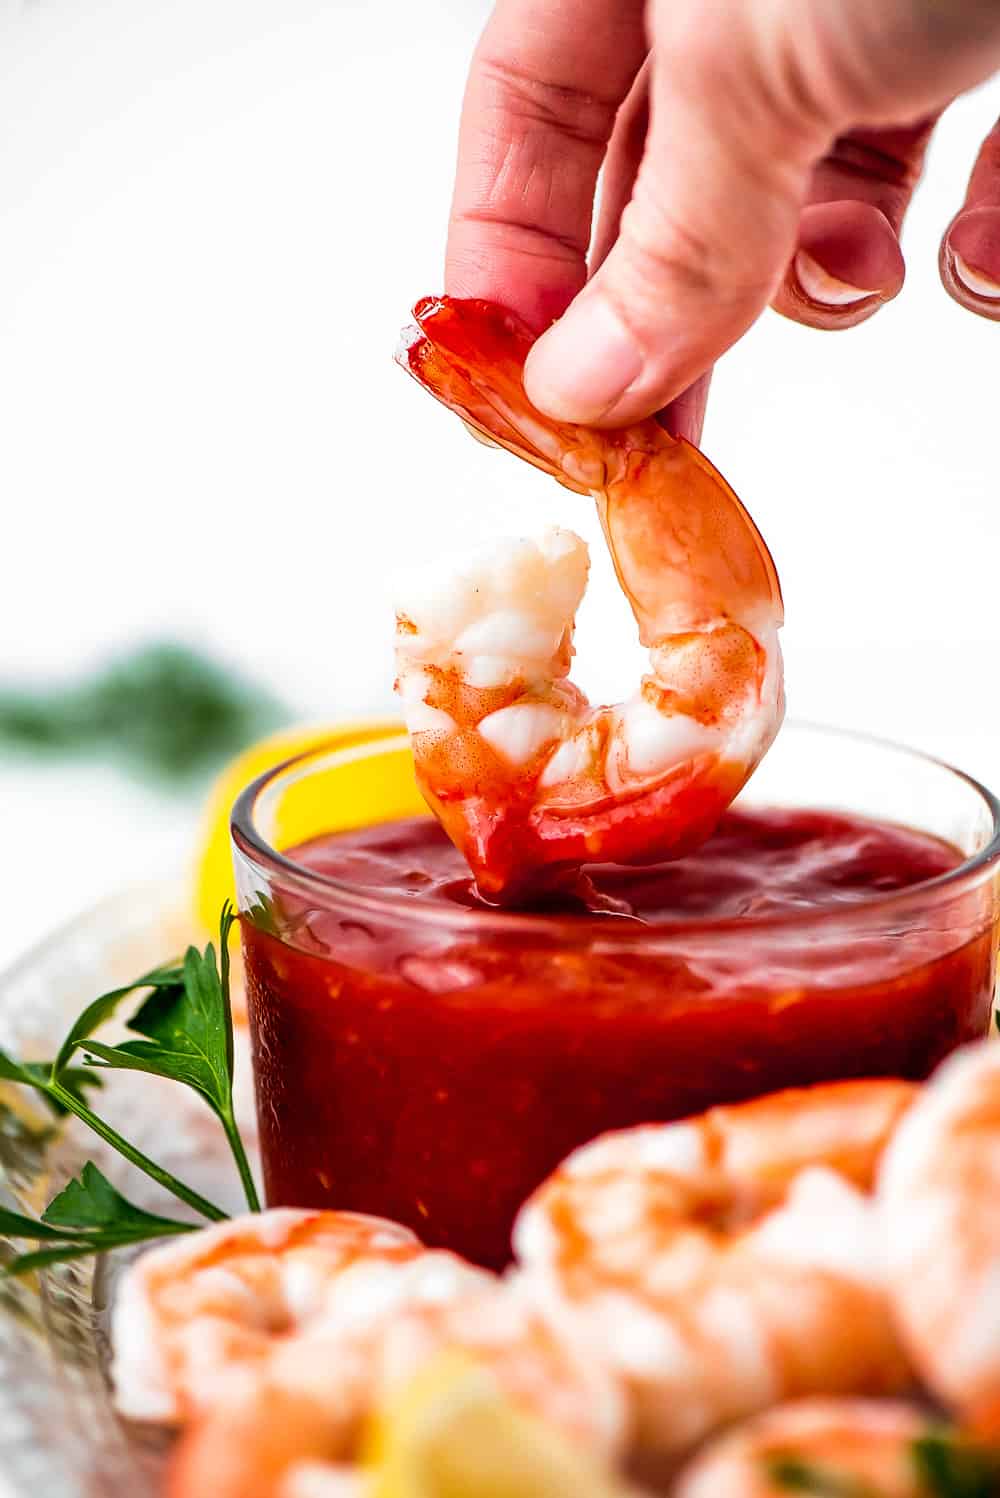 shrimp dipped in cocktail sauce